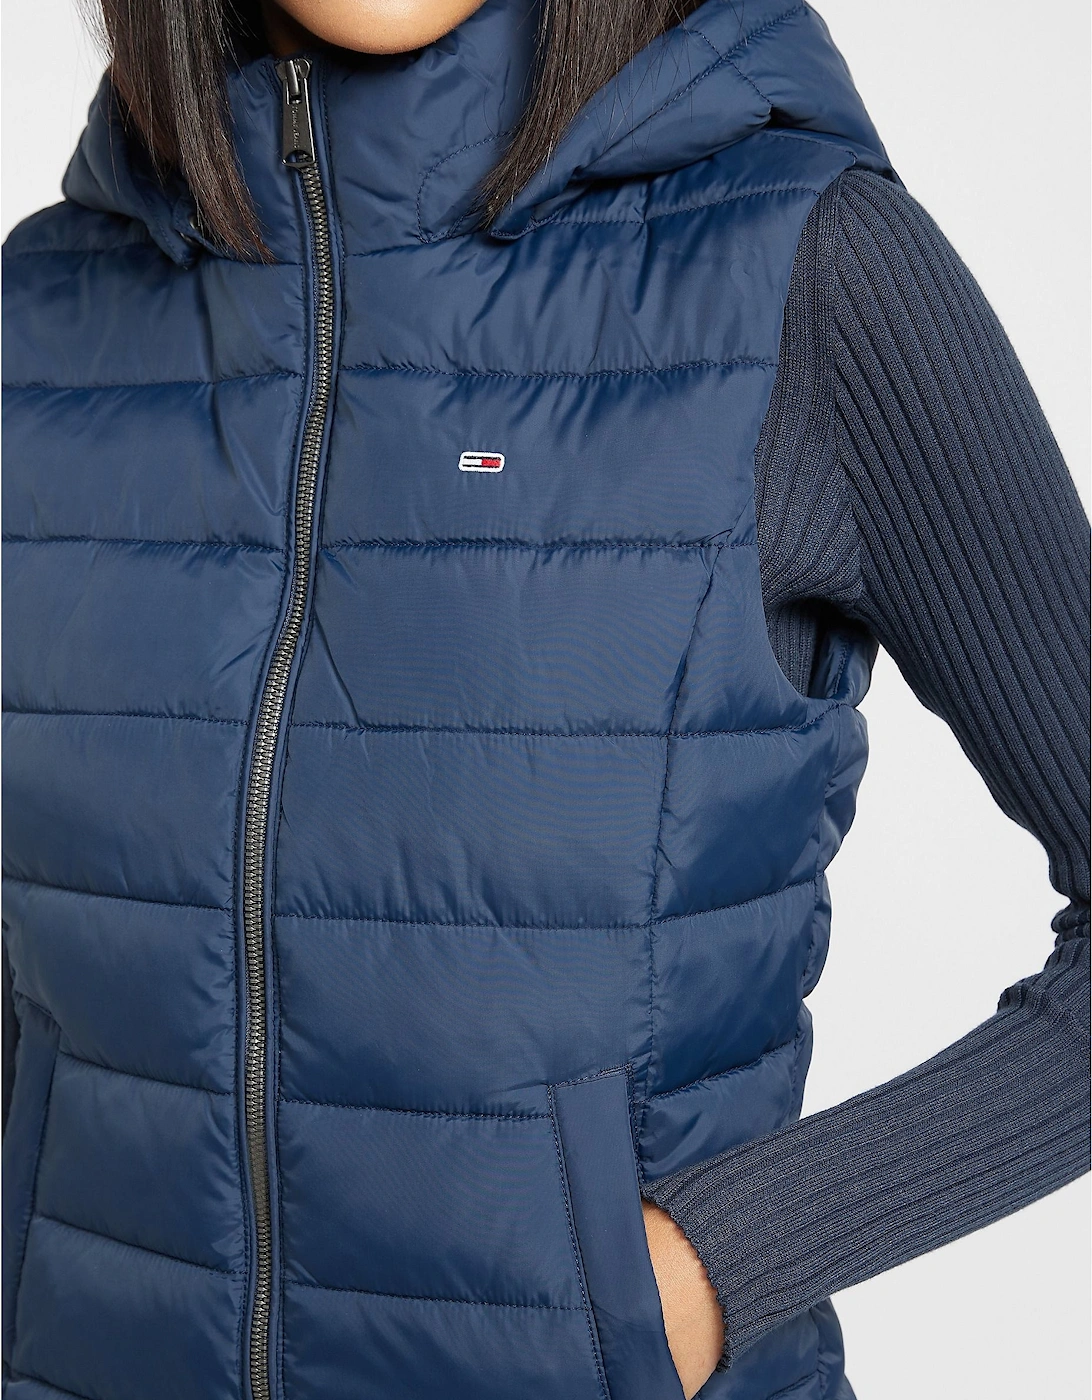 Womens Quilted Gilet